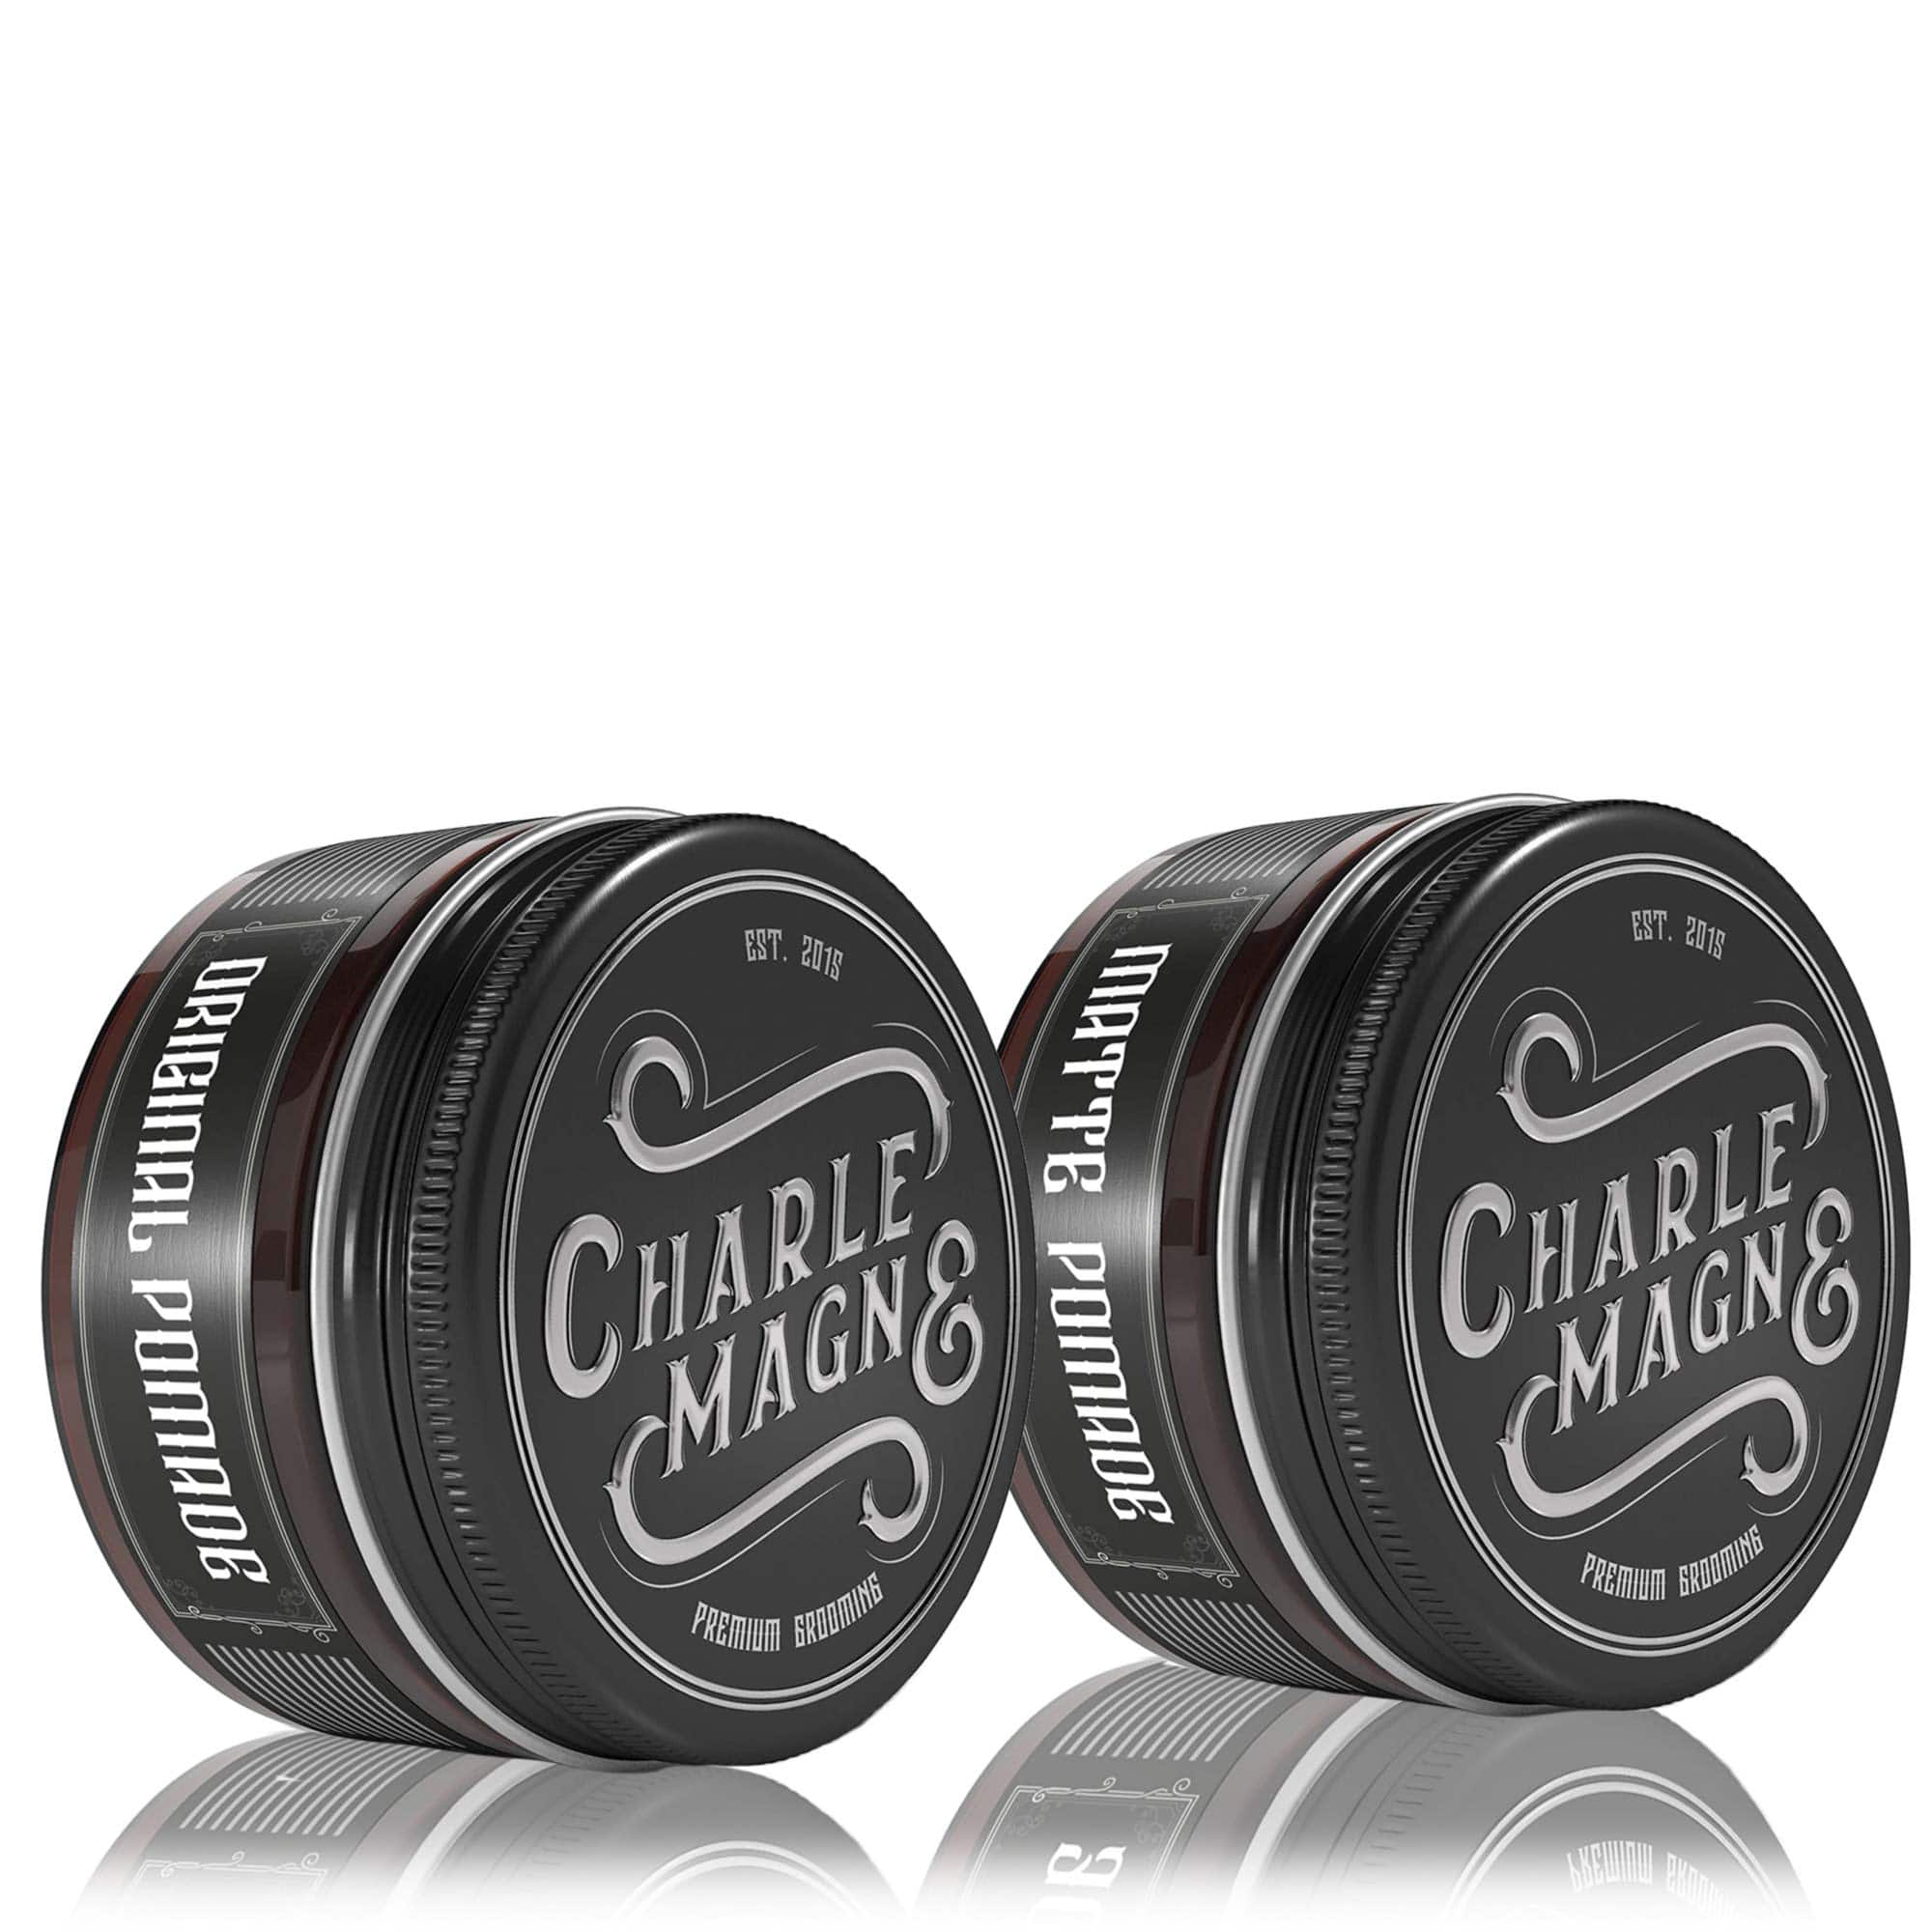 Perfect Pomades